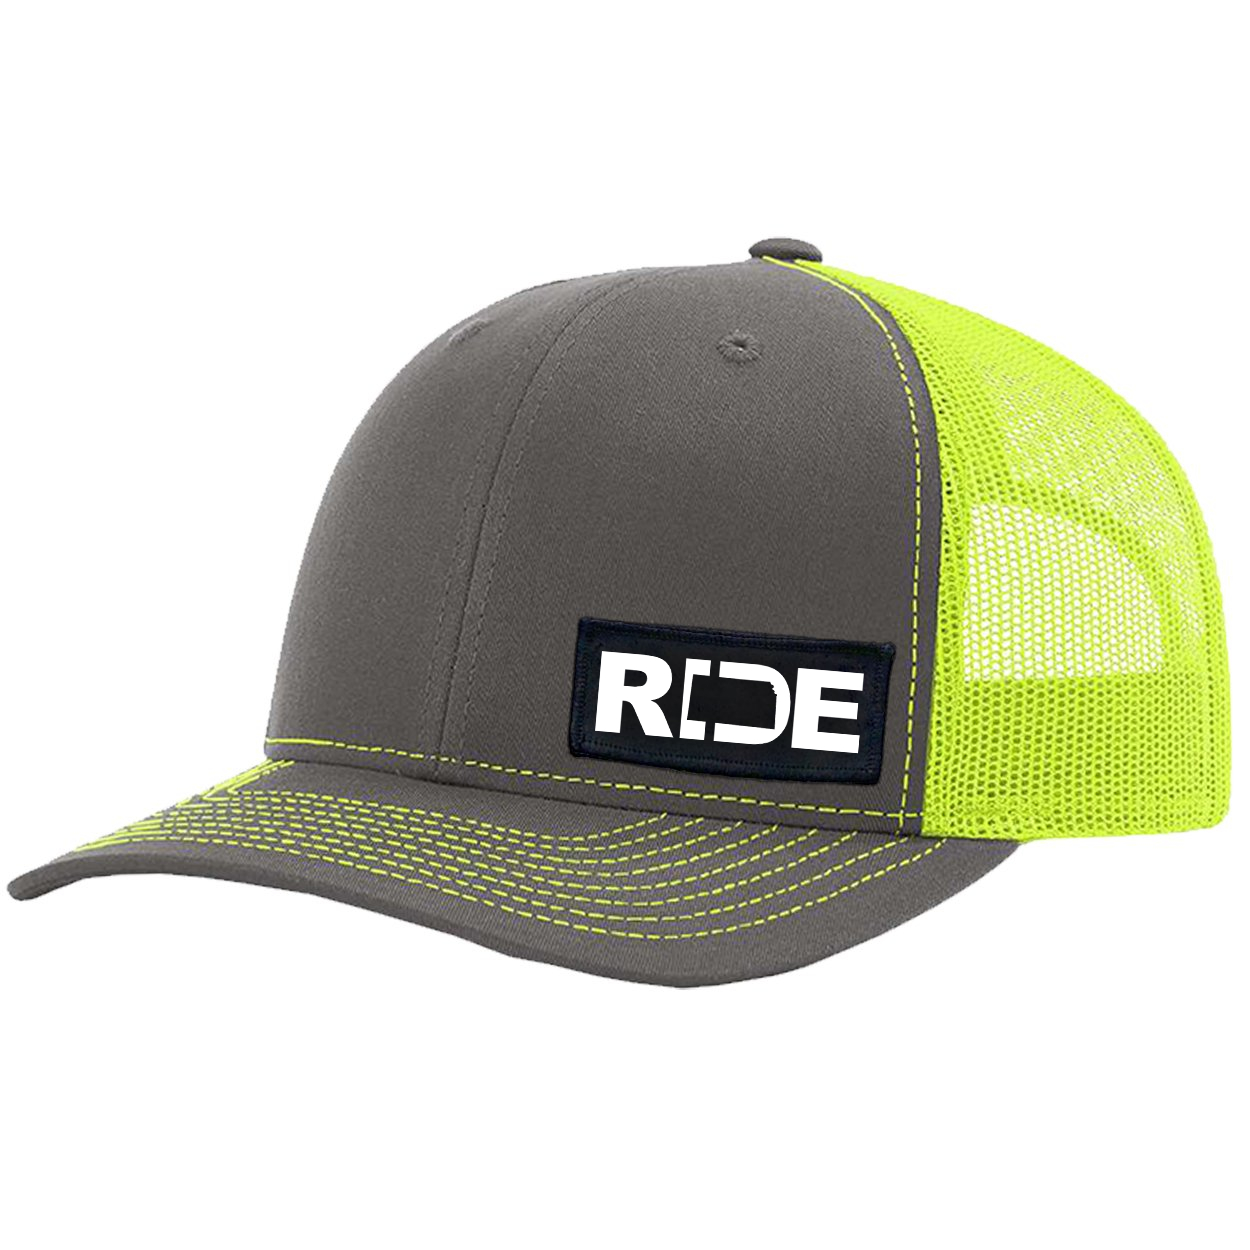 Ride Kansas Night Out Woven Patch Snapback Trucker Hat Charcoal/Neon Yellow (White Logo)